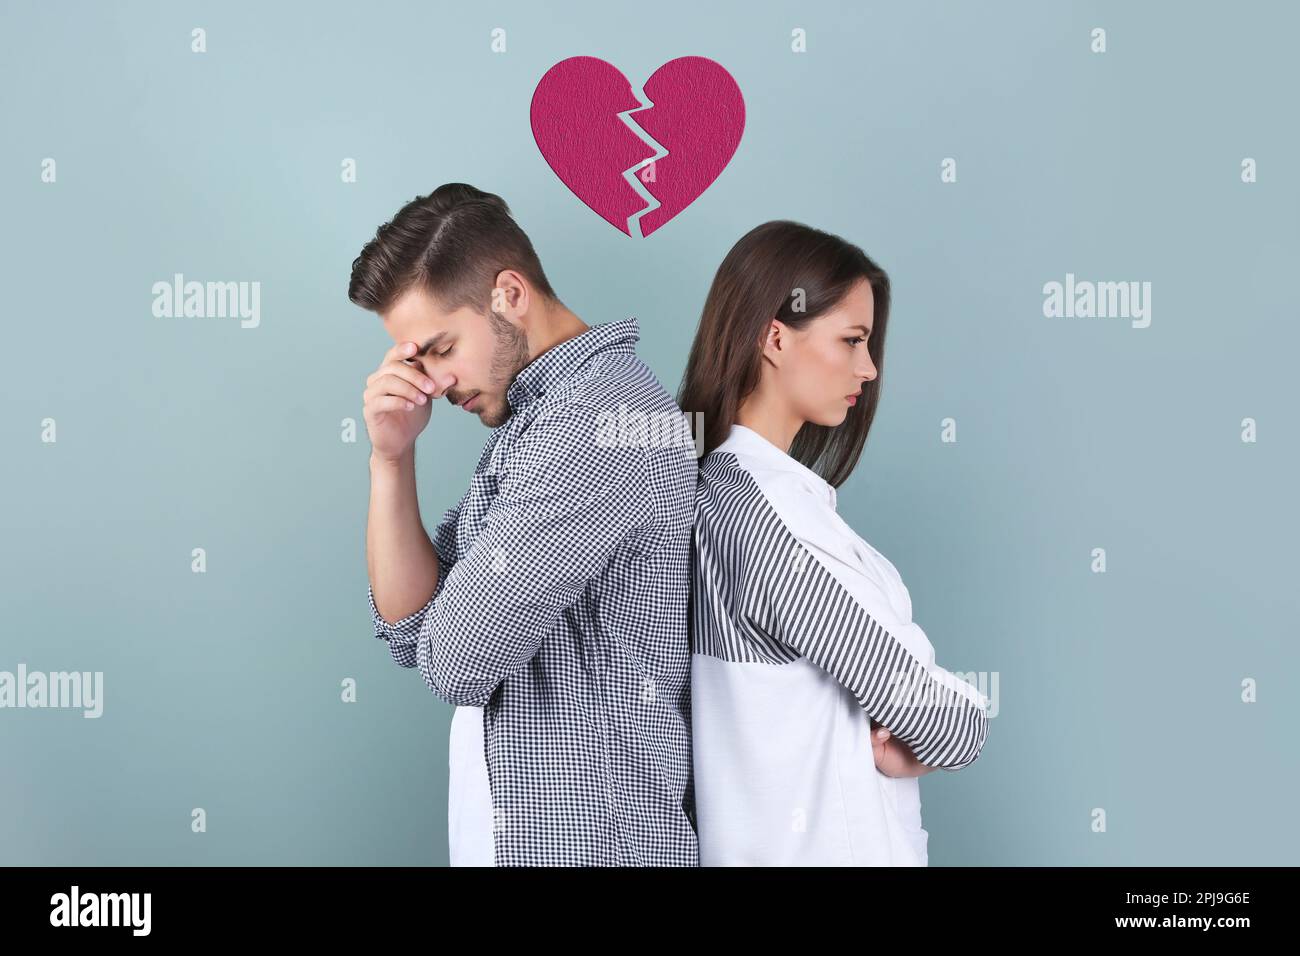 Upset young couple and illustration of broken heart on color background. Relationship problems Stock Photo